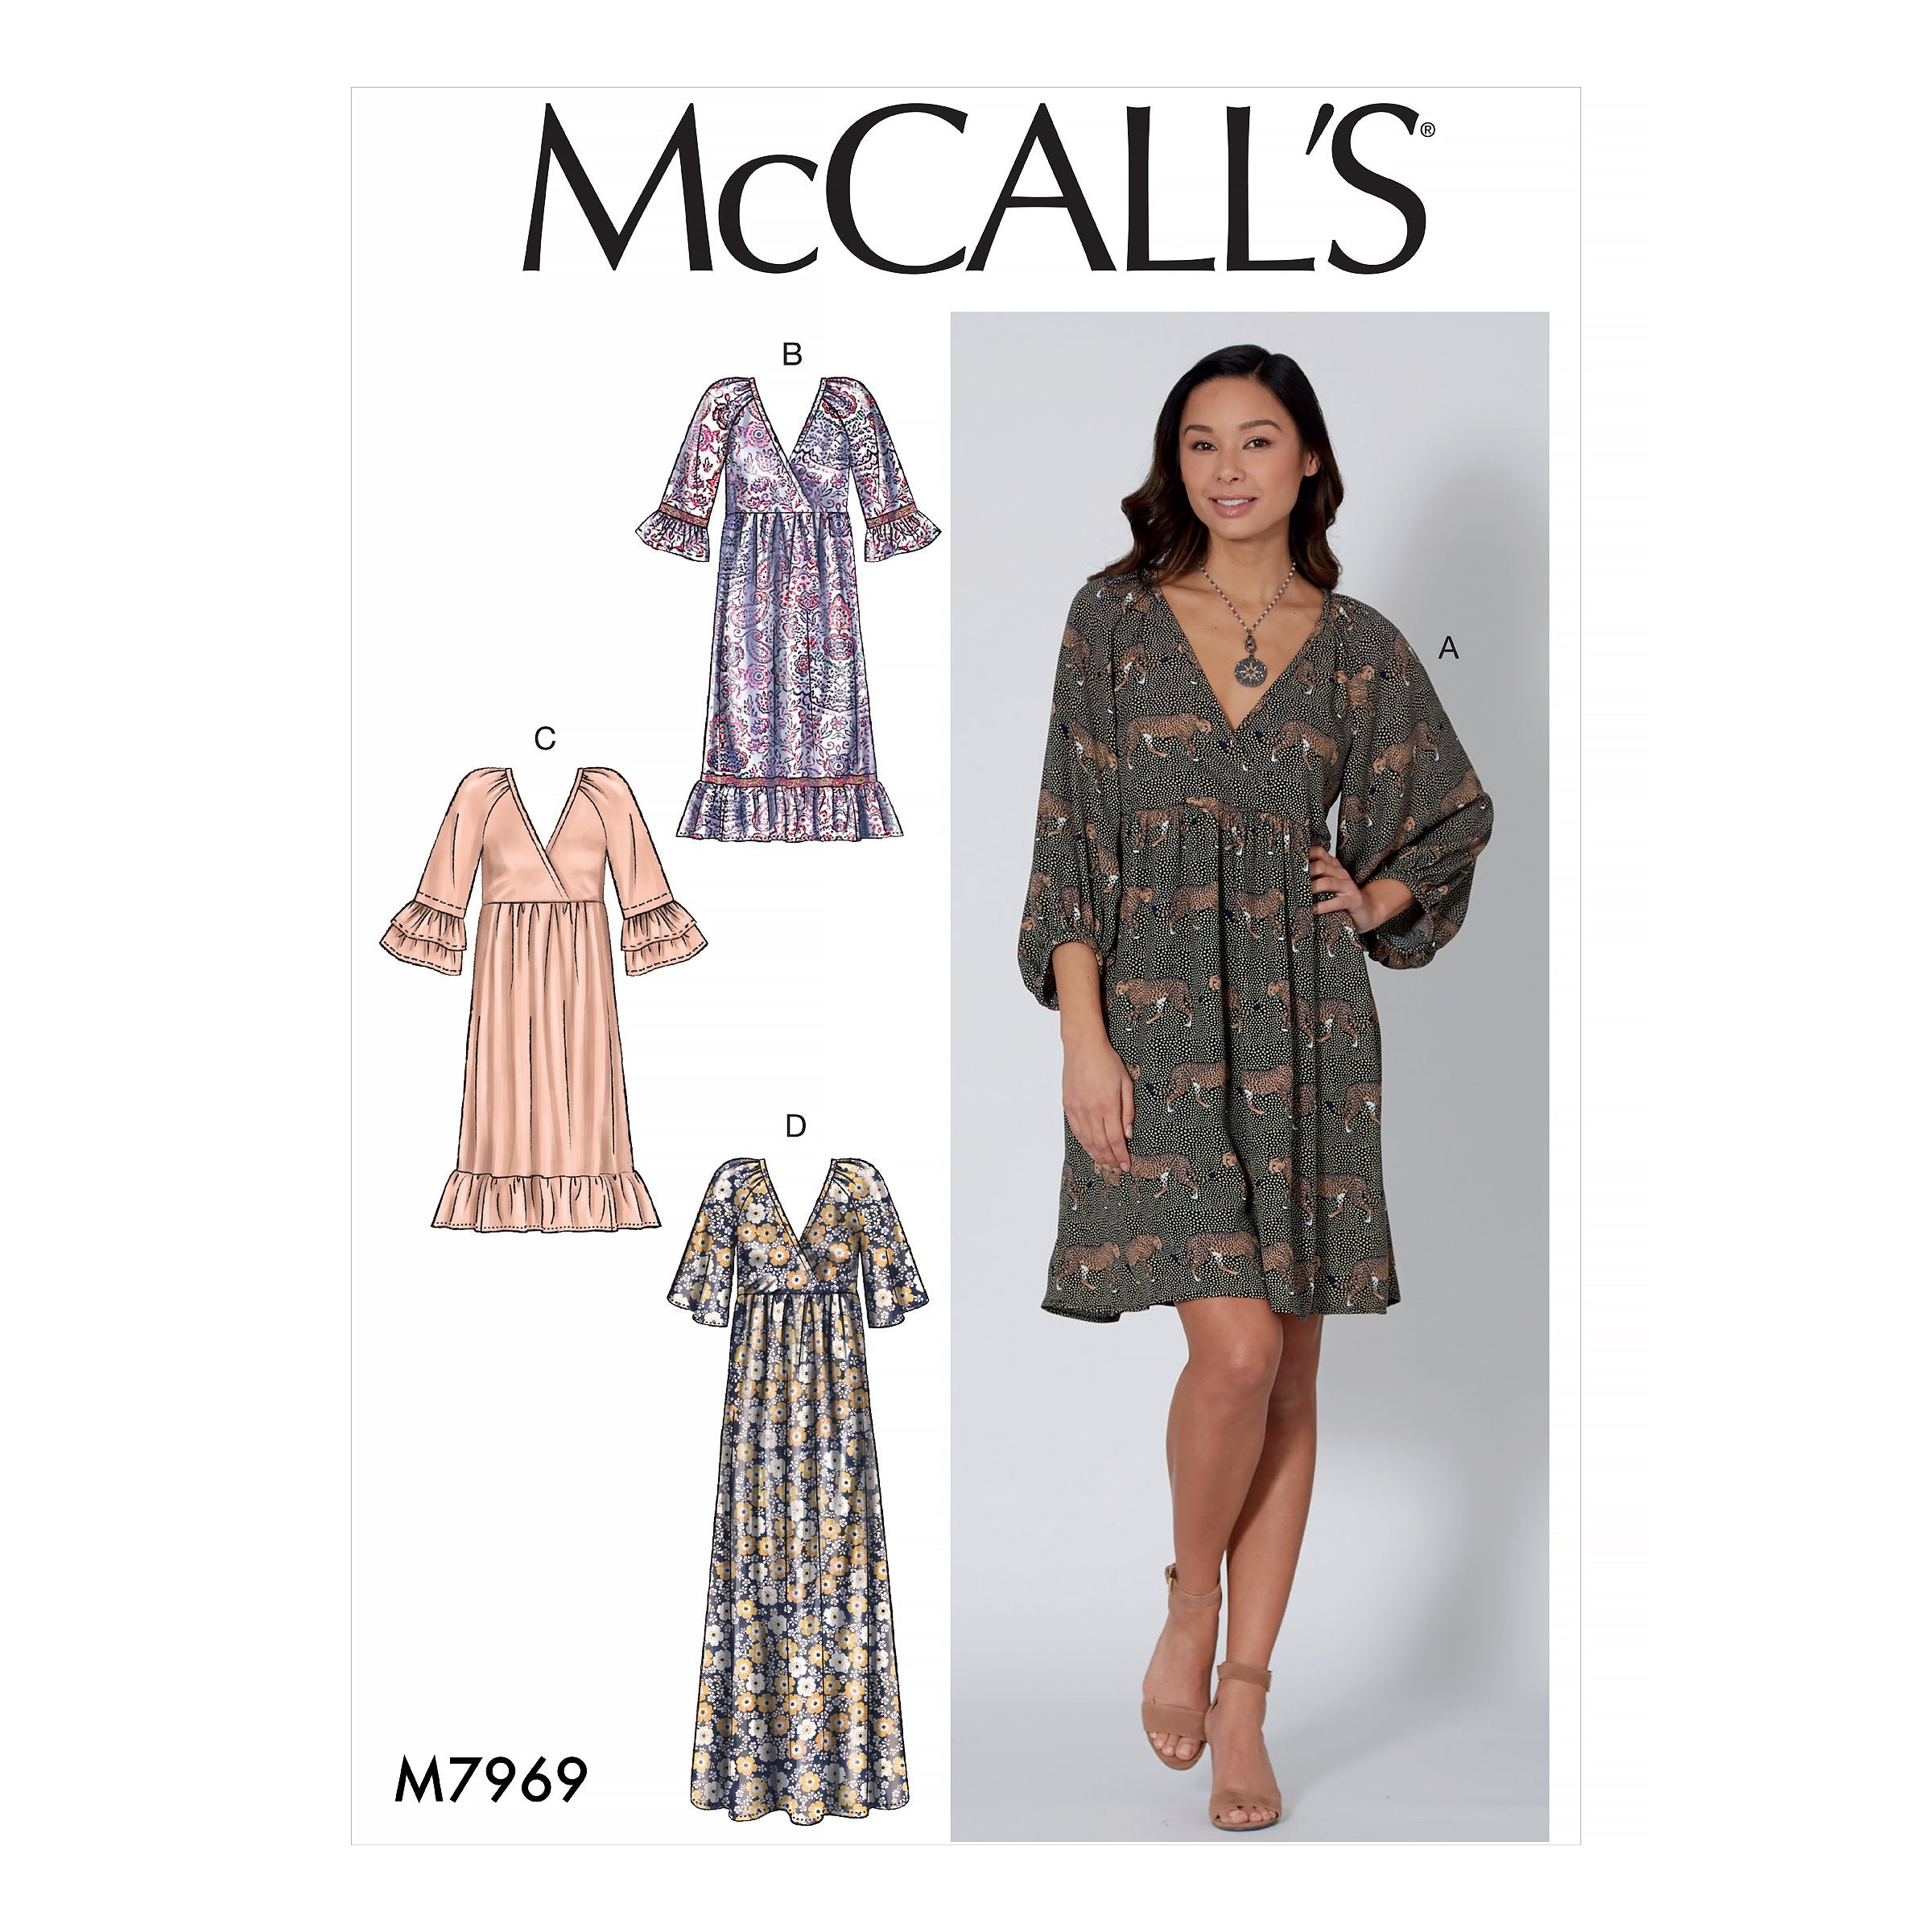 McCalls 7969 Dresses sewing pattern from Jaycotts Sewing Supplies